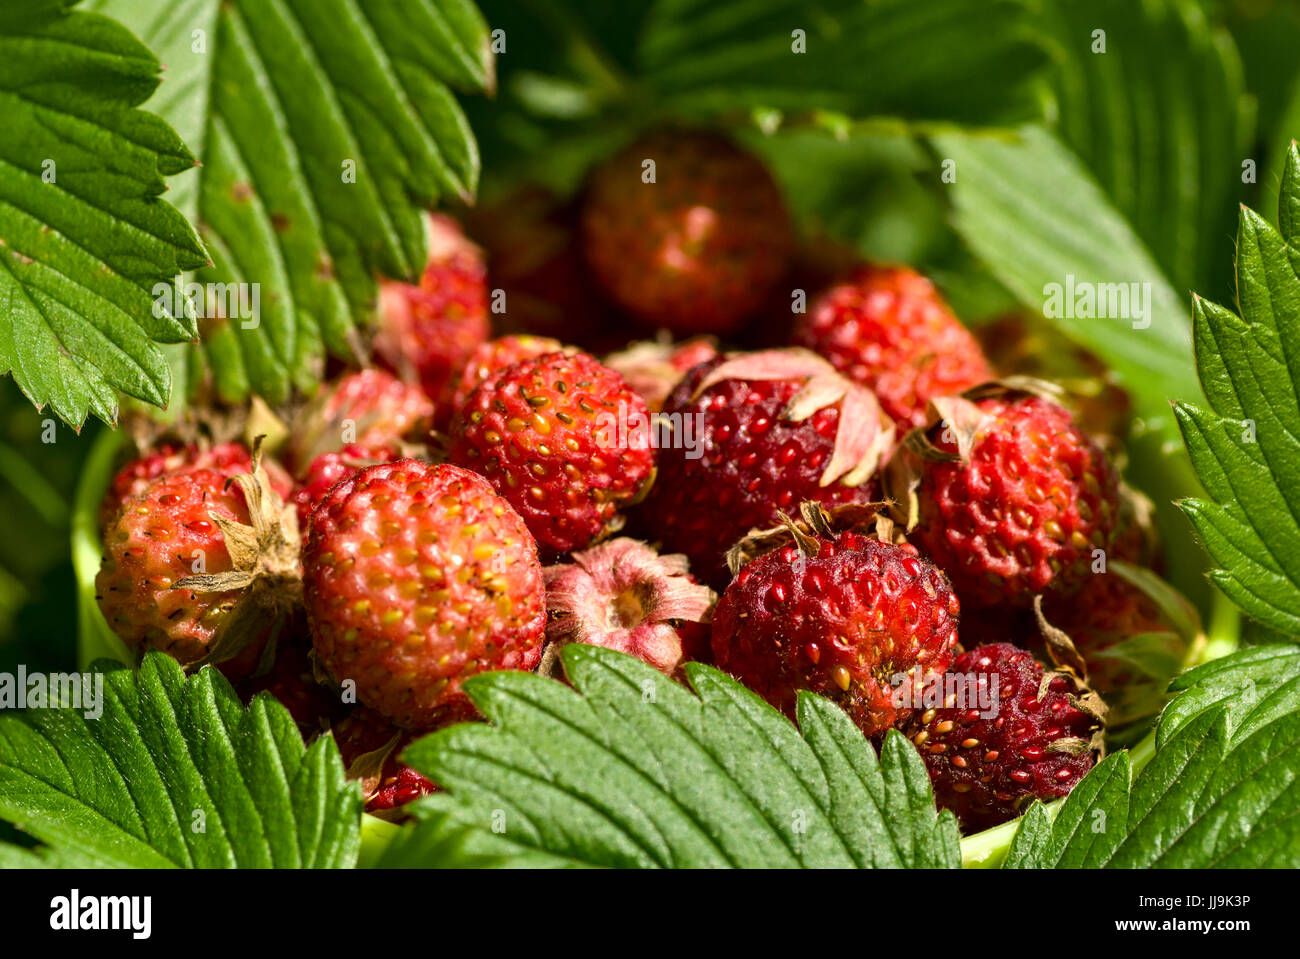 Heap of wild strawberries framed by leaves Stock Photo